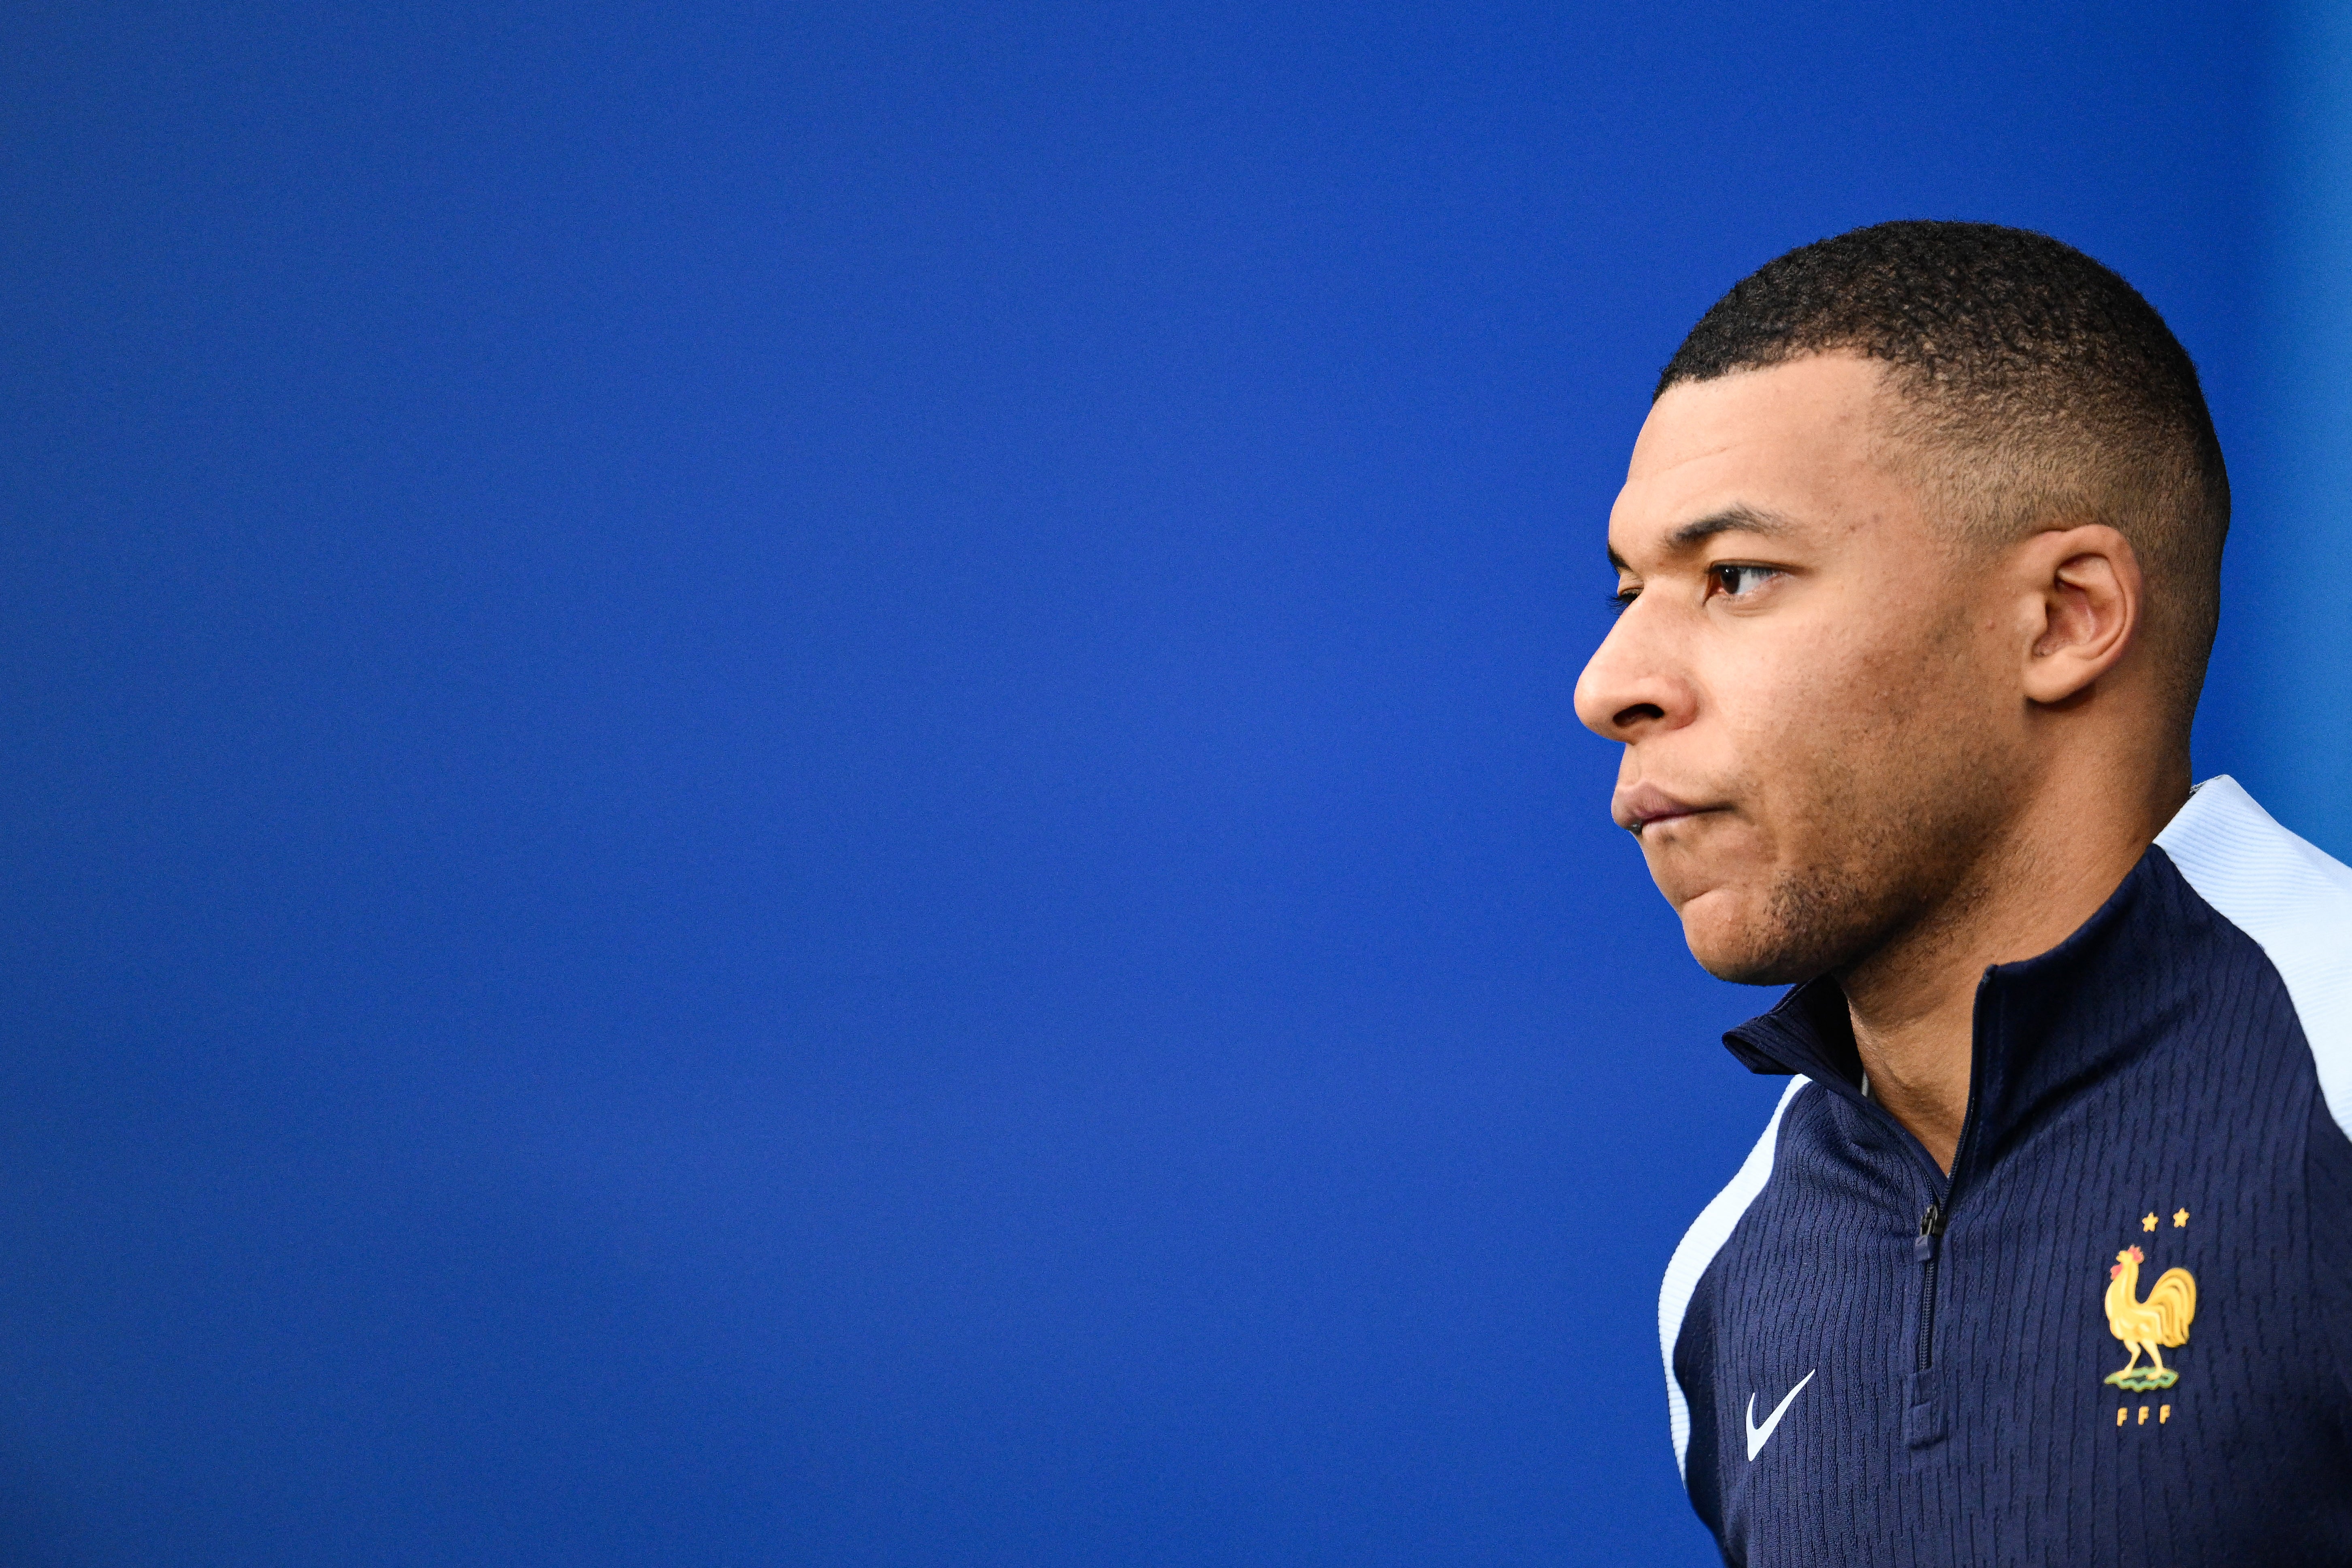 Kylian Mbappe was on the bench for France’s draw with Netherlands